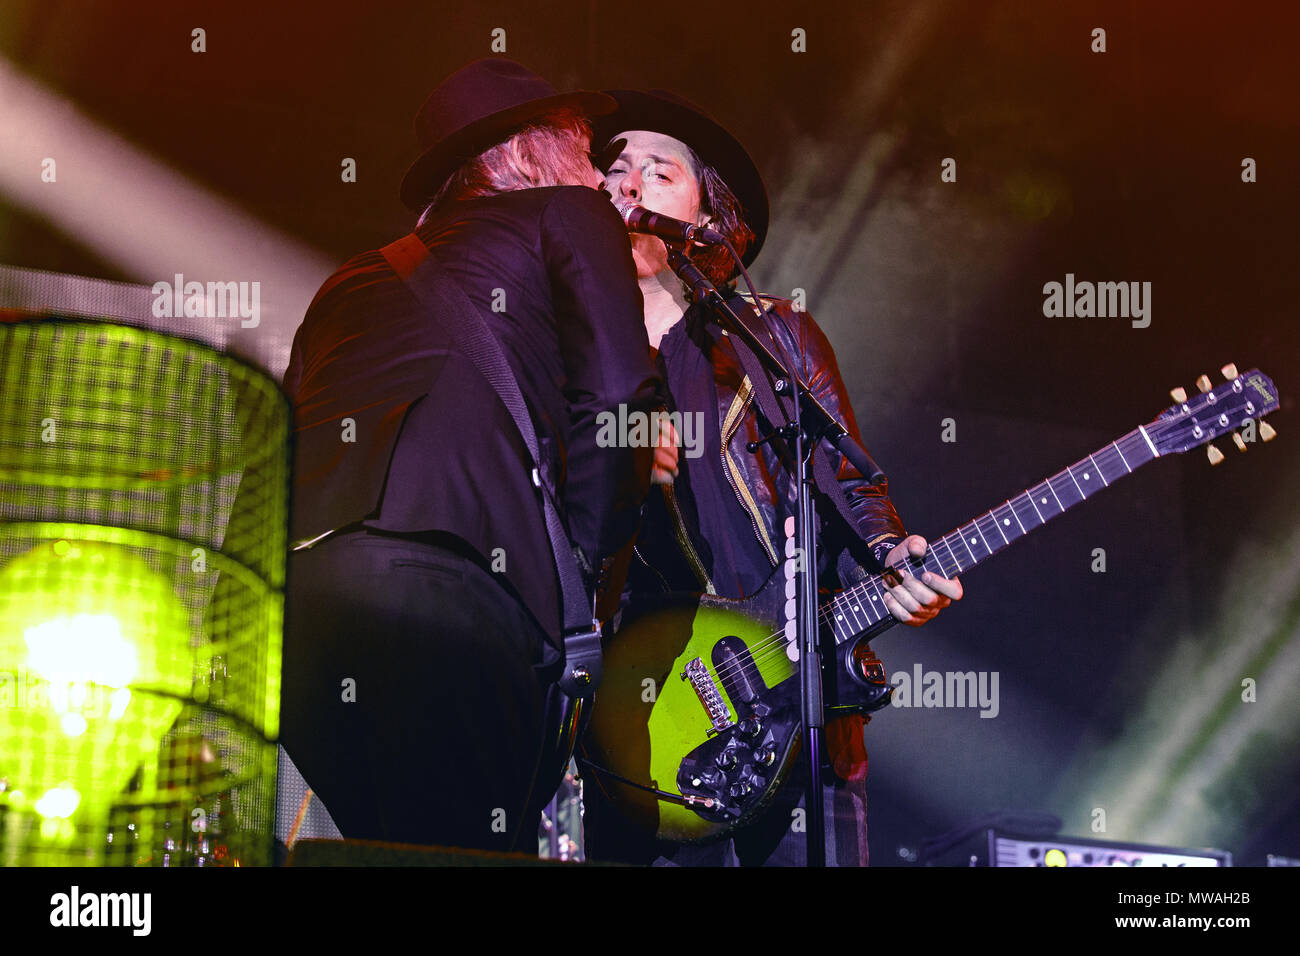 Pete Doherty and Carl Barât of The Libertines live onstage in Glasgow, Scotland in 2016. Peter Doherty and Carl Barat, The Libertines onstage. Stock Photo